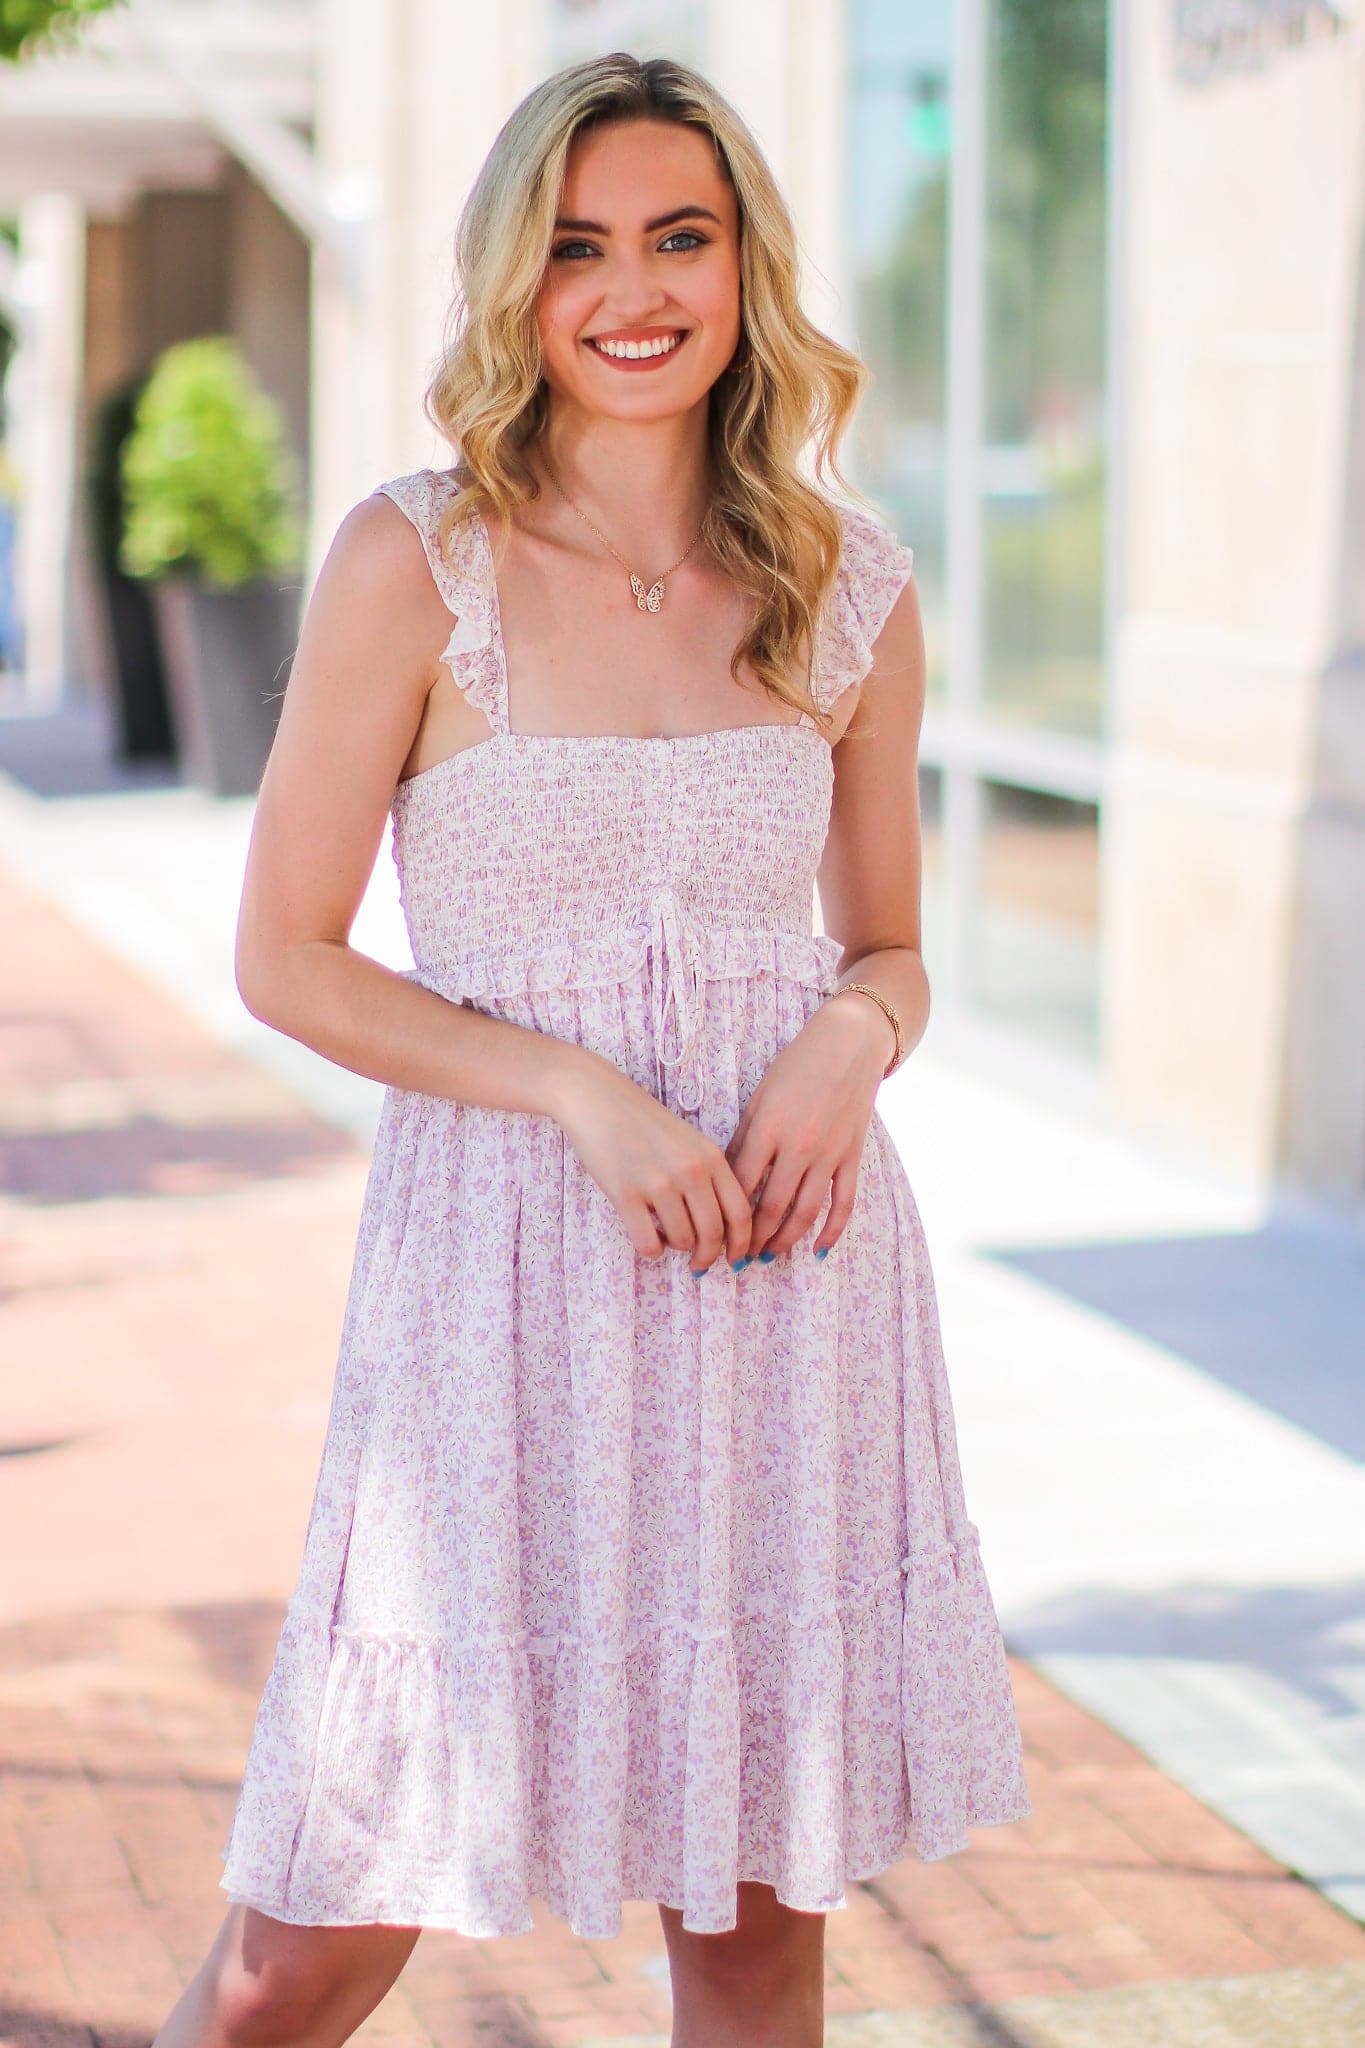  Take the Moment Floral Ruffle Dress - FINAL SALE - Madison and Mallory